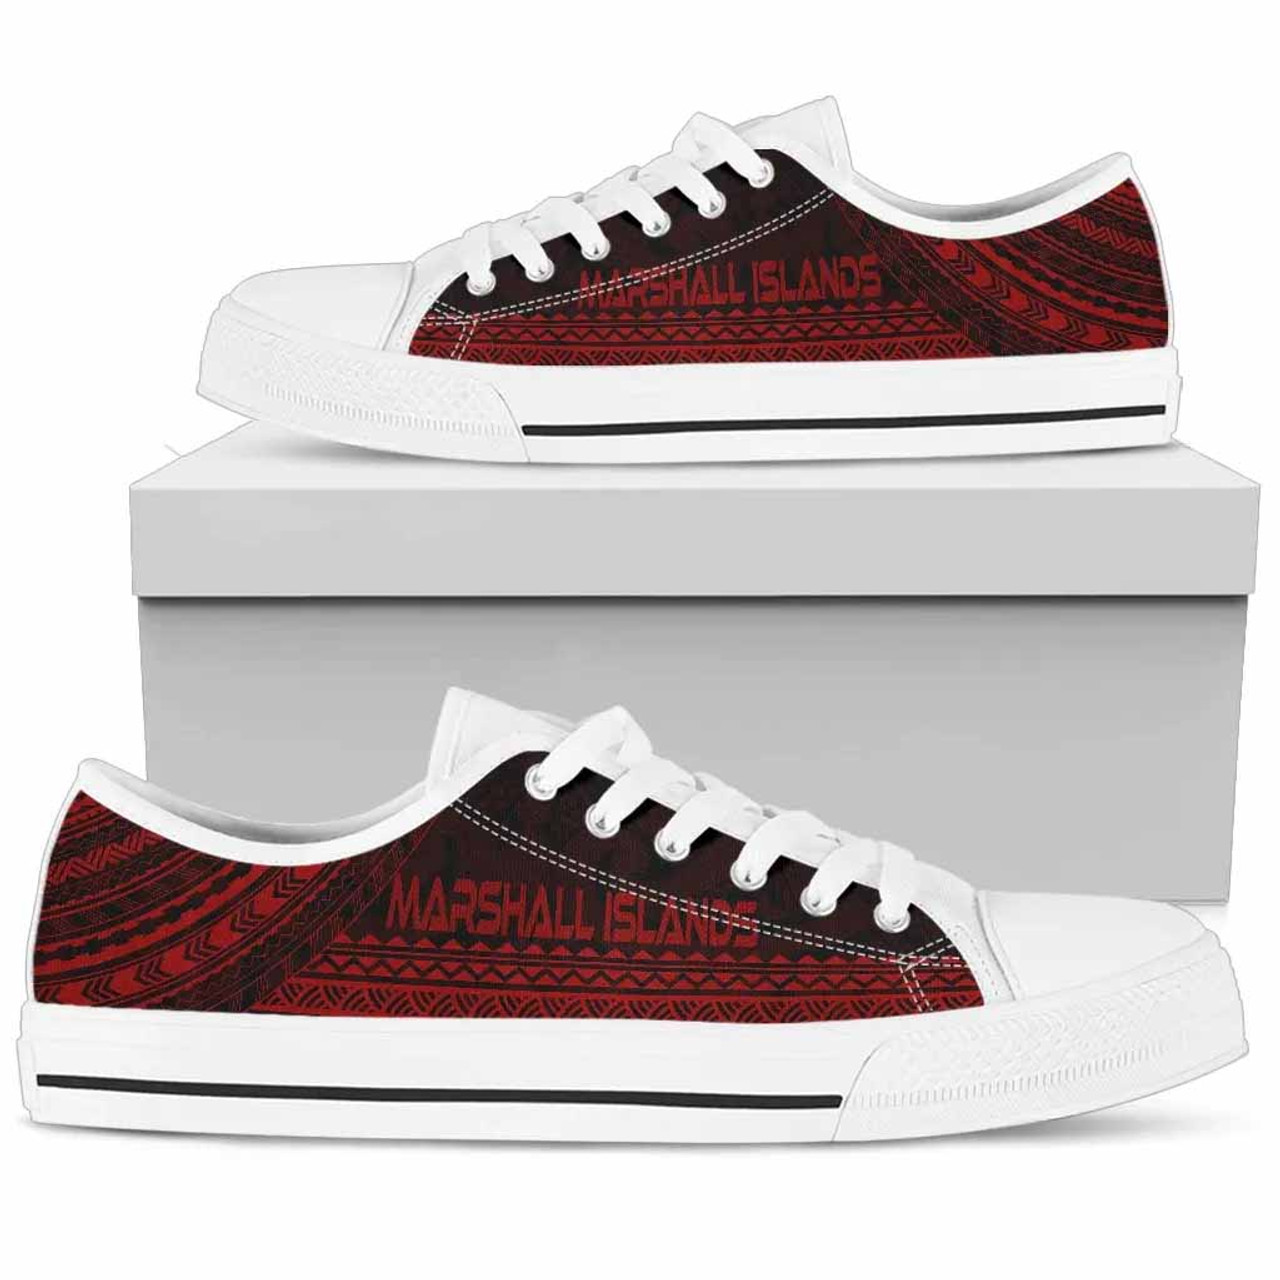 Marshall Islands Low Top Shoes - Polynesian Red Chief Version 1